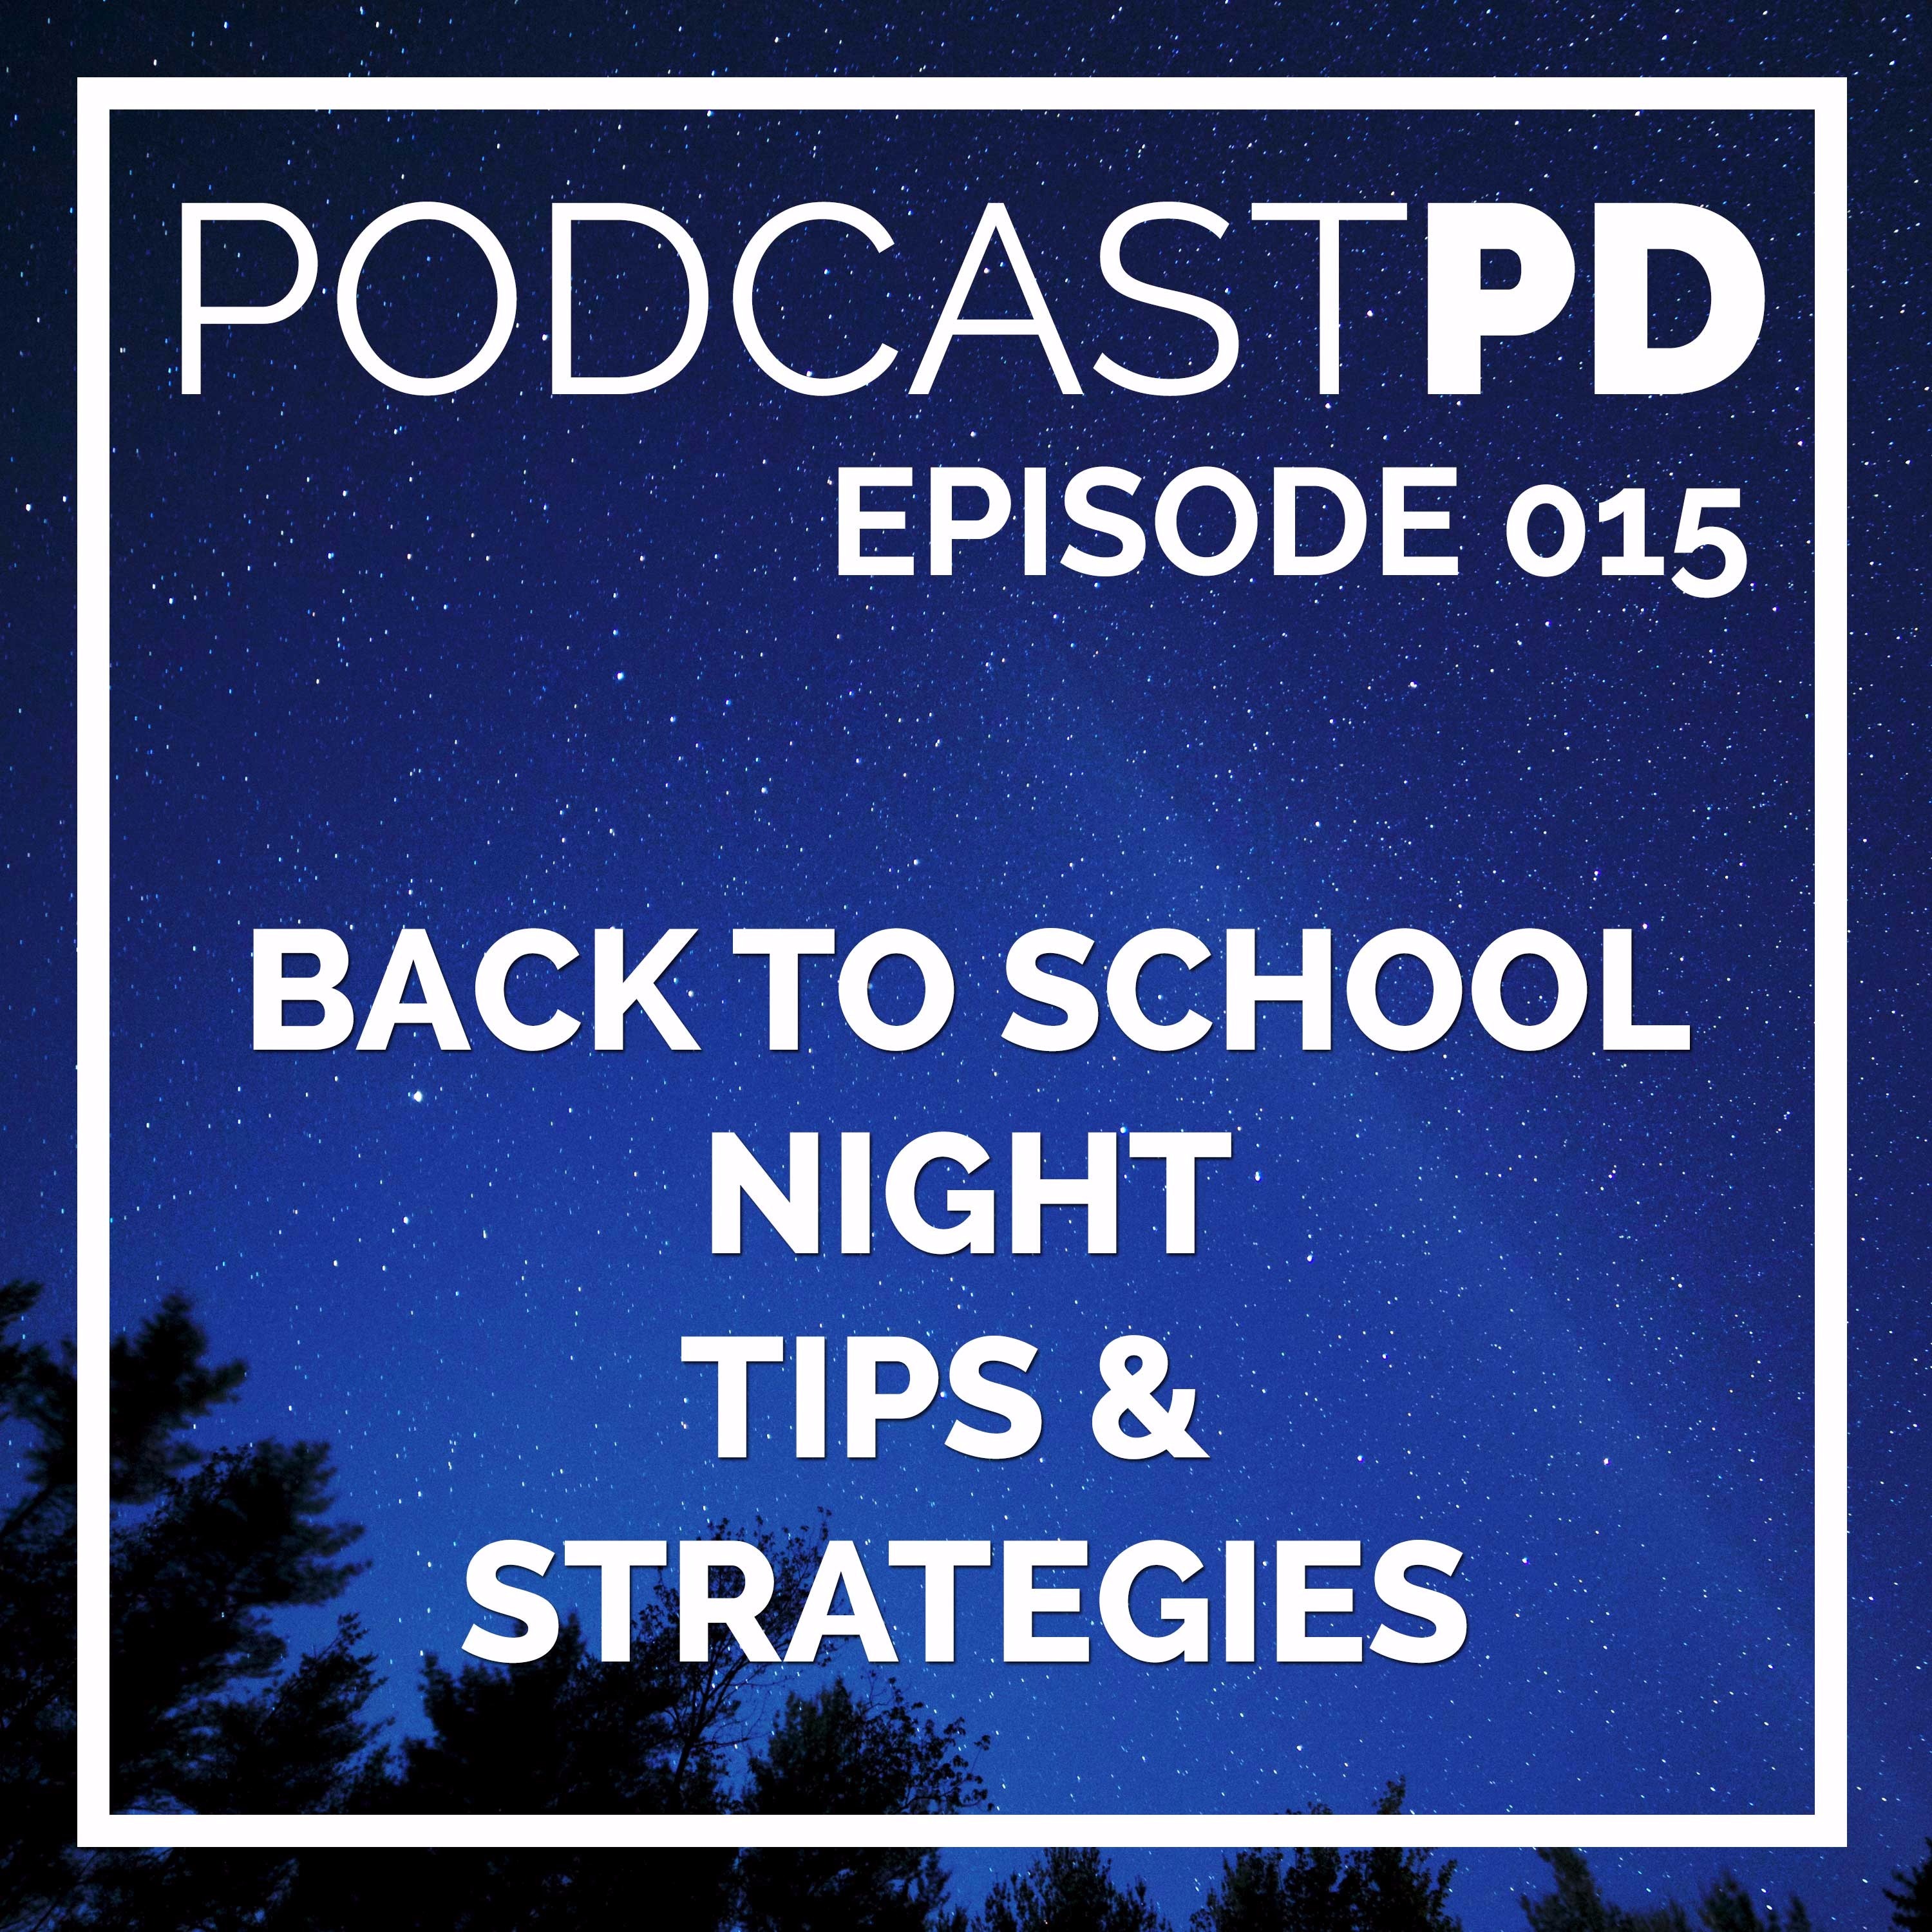 Back to School Night Tips and Strategies - PPD015 Image